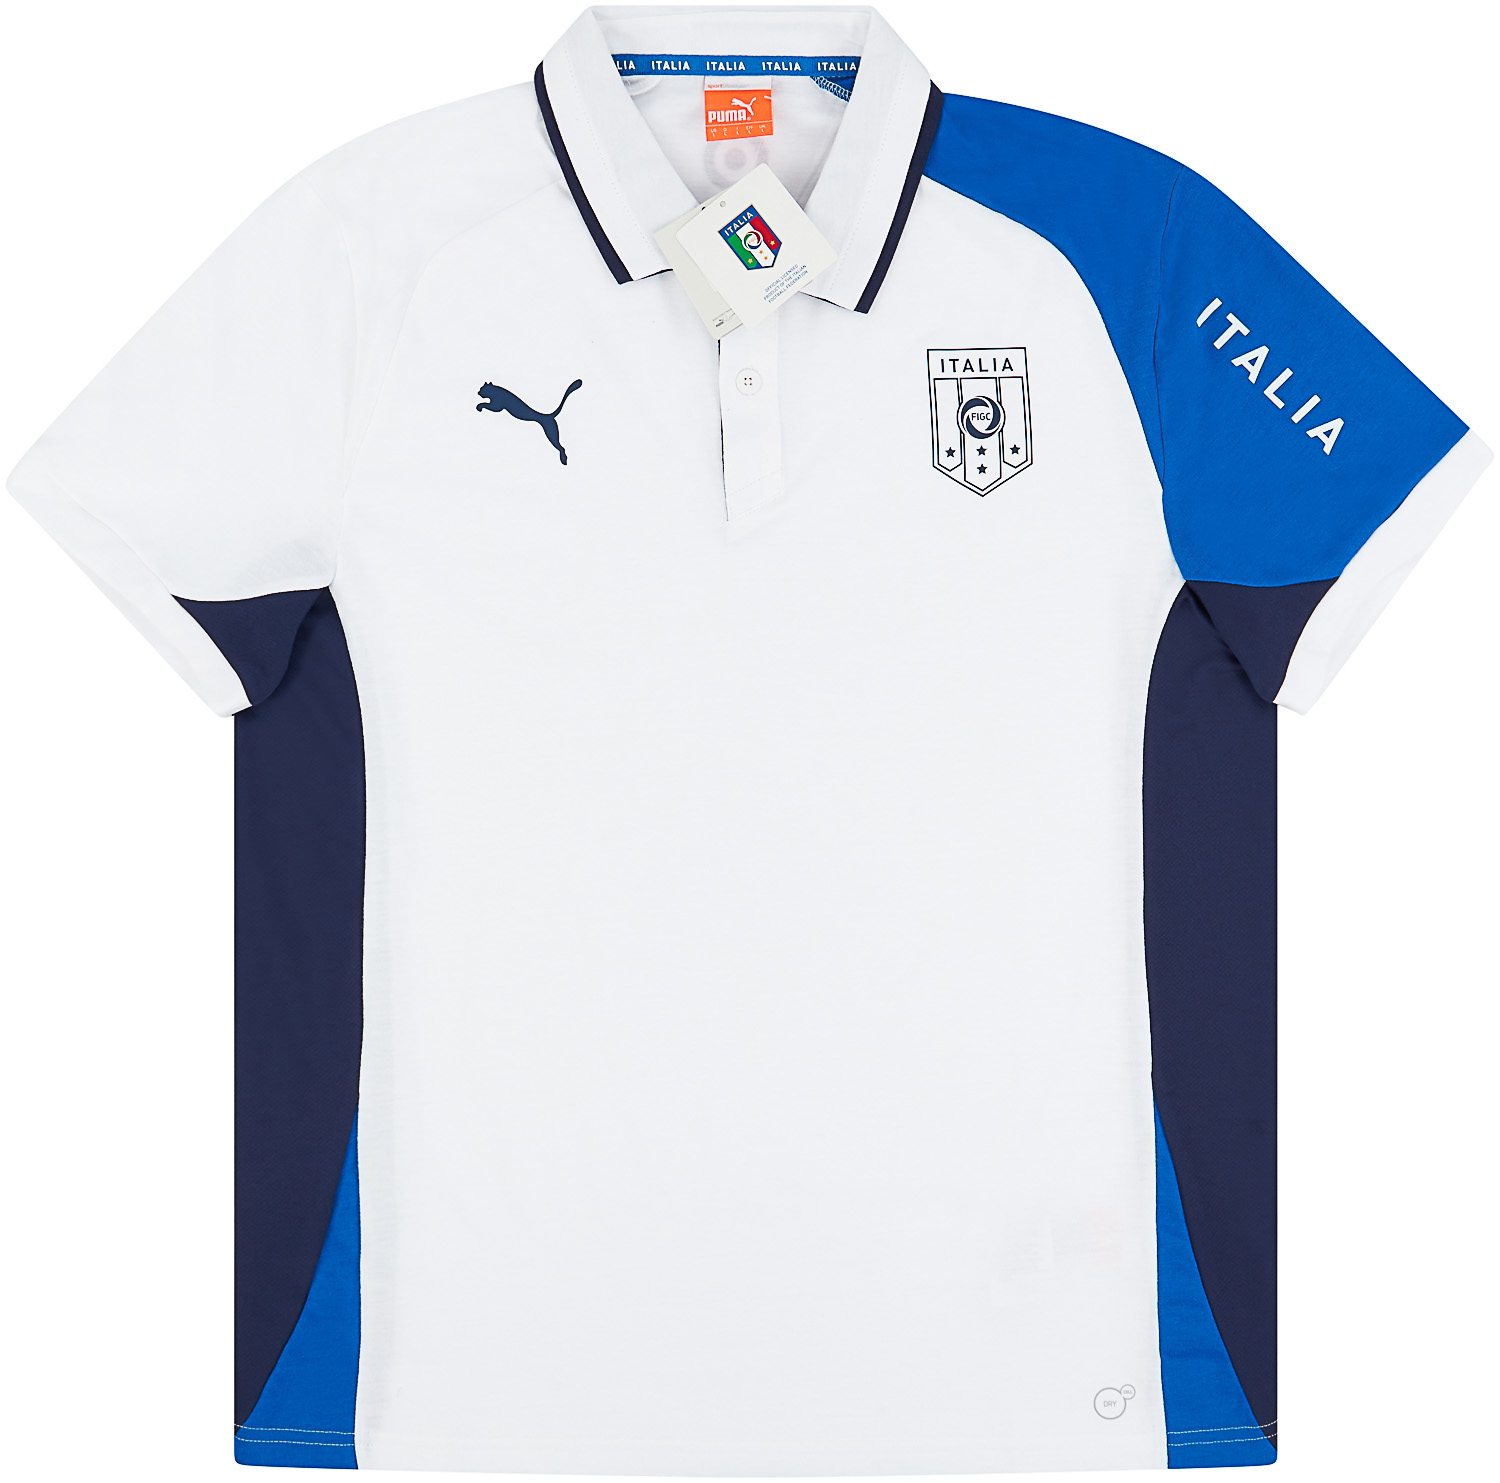 Gummi sikkerhed Bogholder 2014-15 Italy Puma Polo T-Shirt - NEW